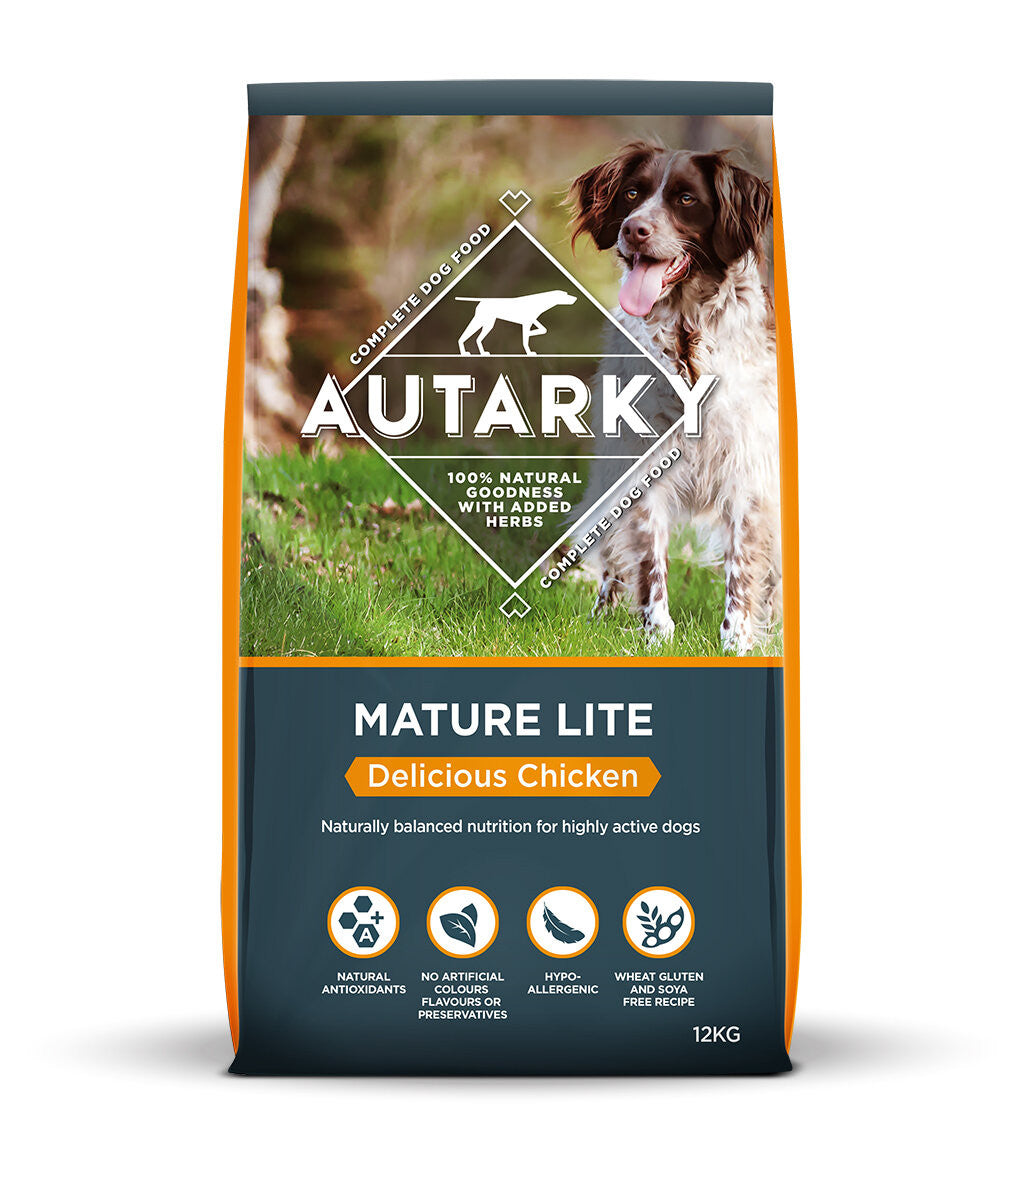 Autarky Mature Lite Delicious Chicken 12kg - Adult Dry Dog Food